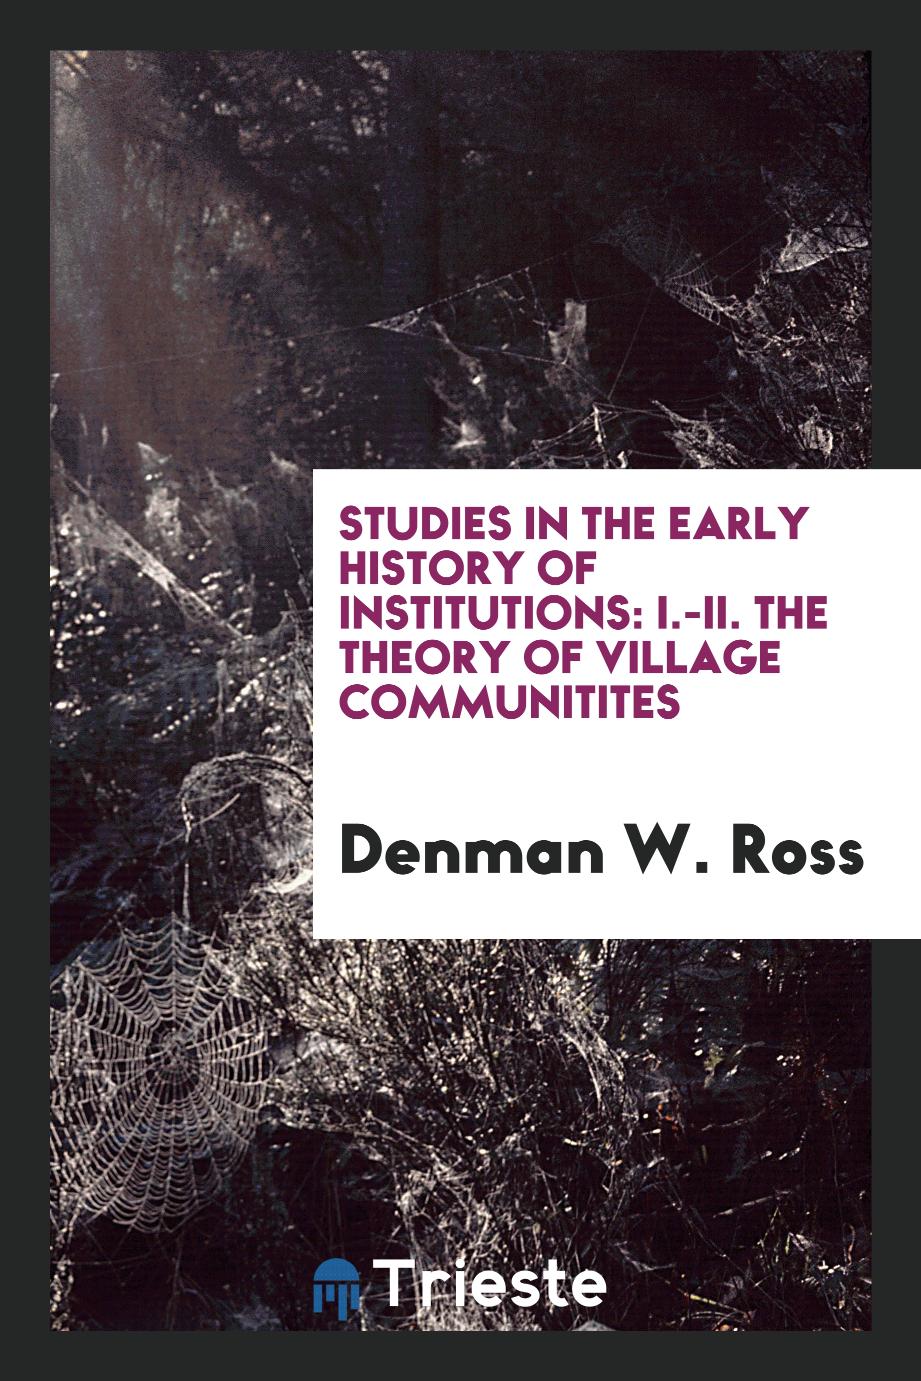 Studies in the early history of institutions: I.-II. The theory of village communitites